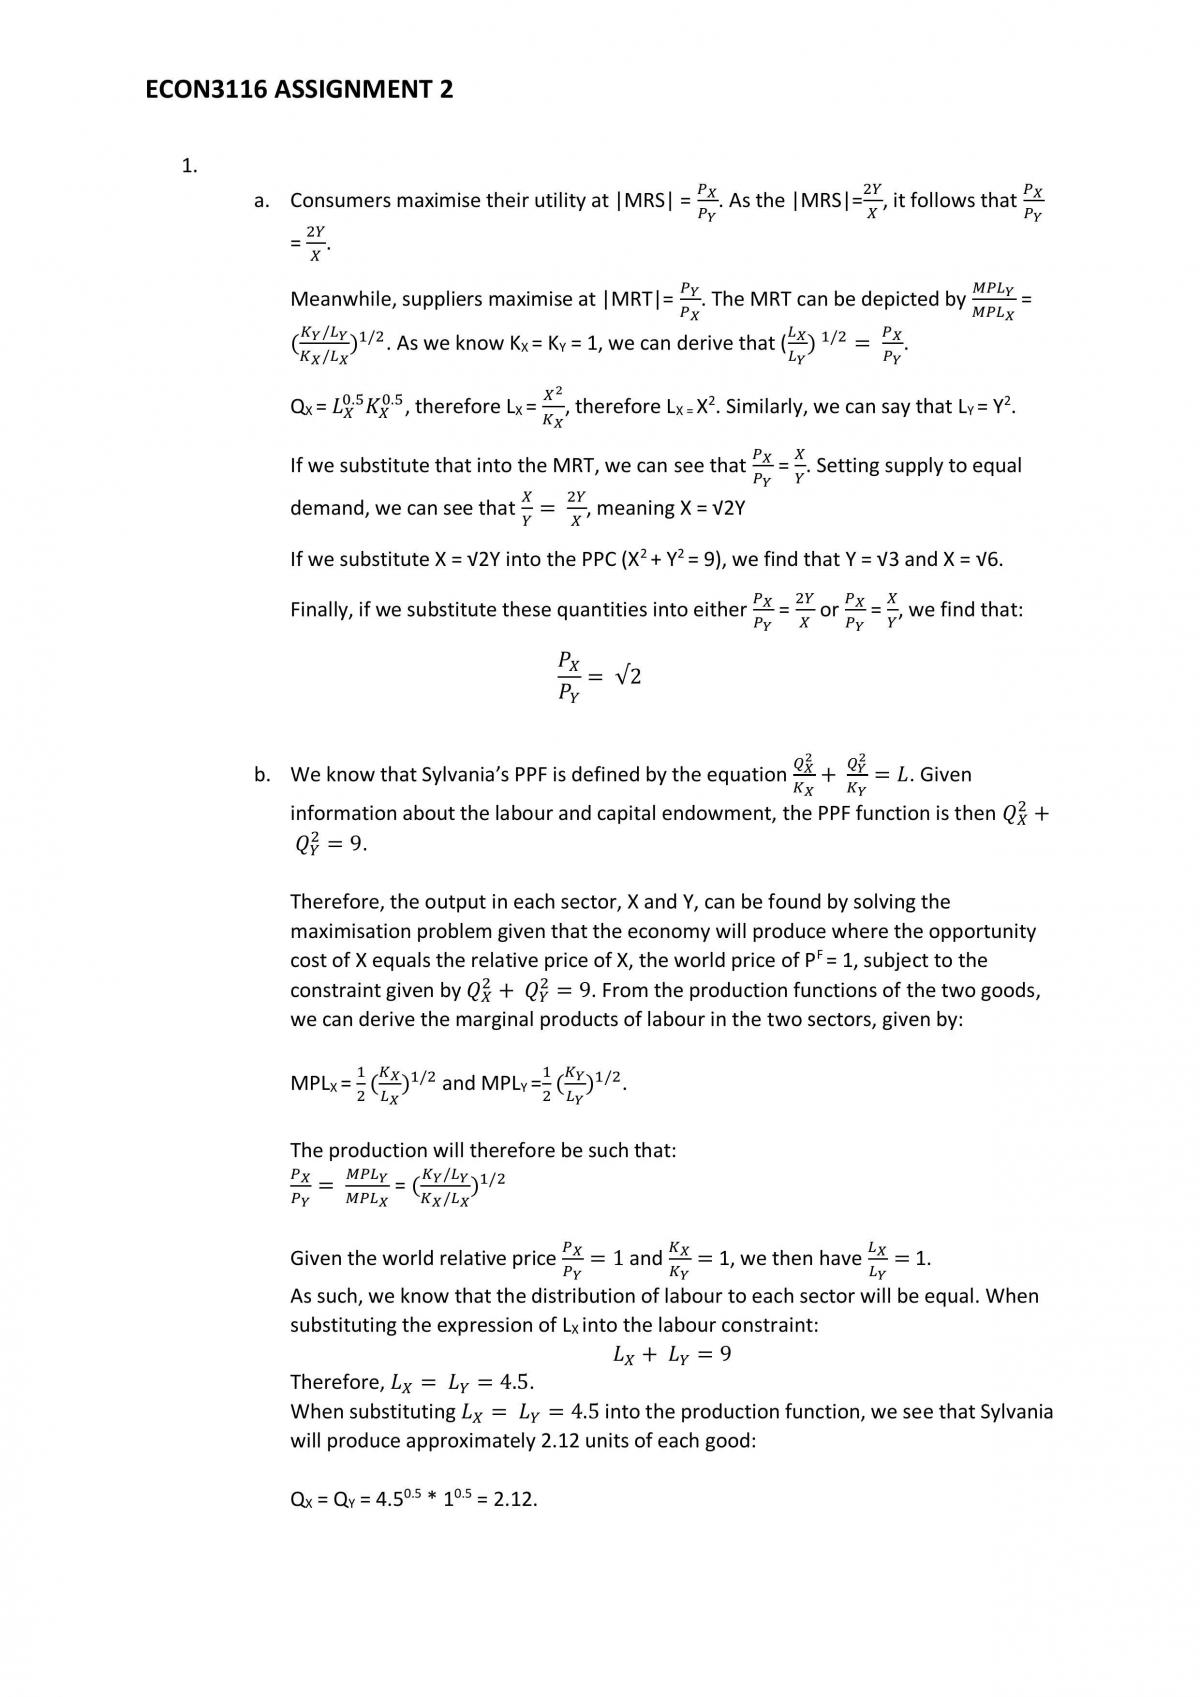 ECON3116 Assignment 2 - Page 1